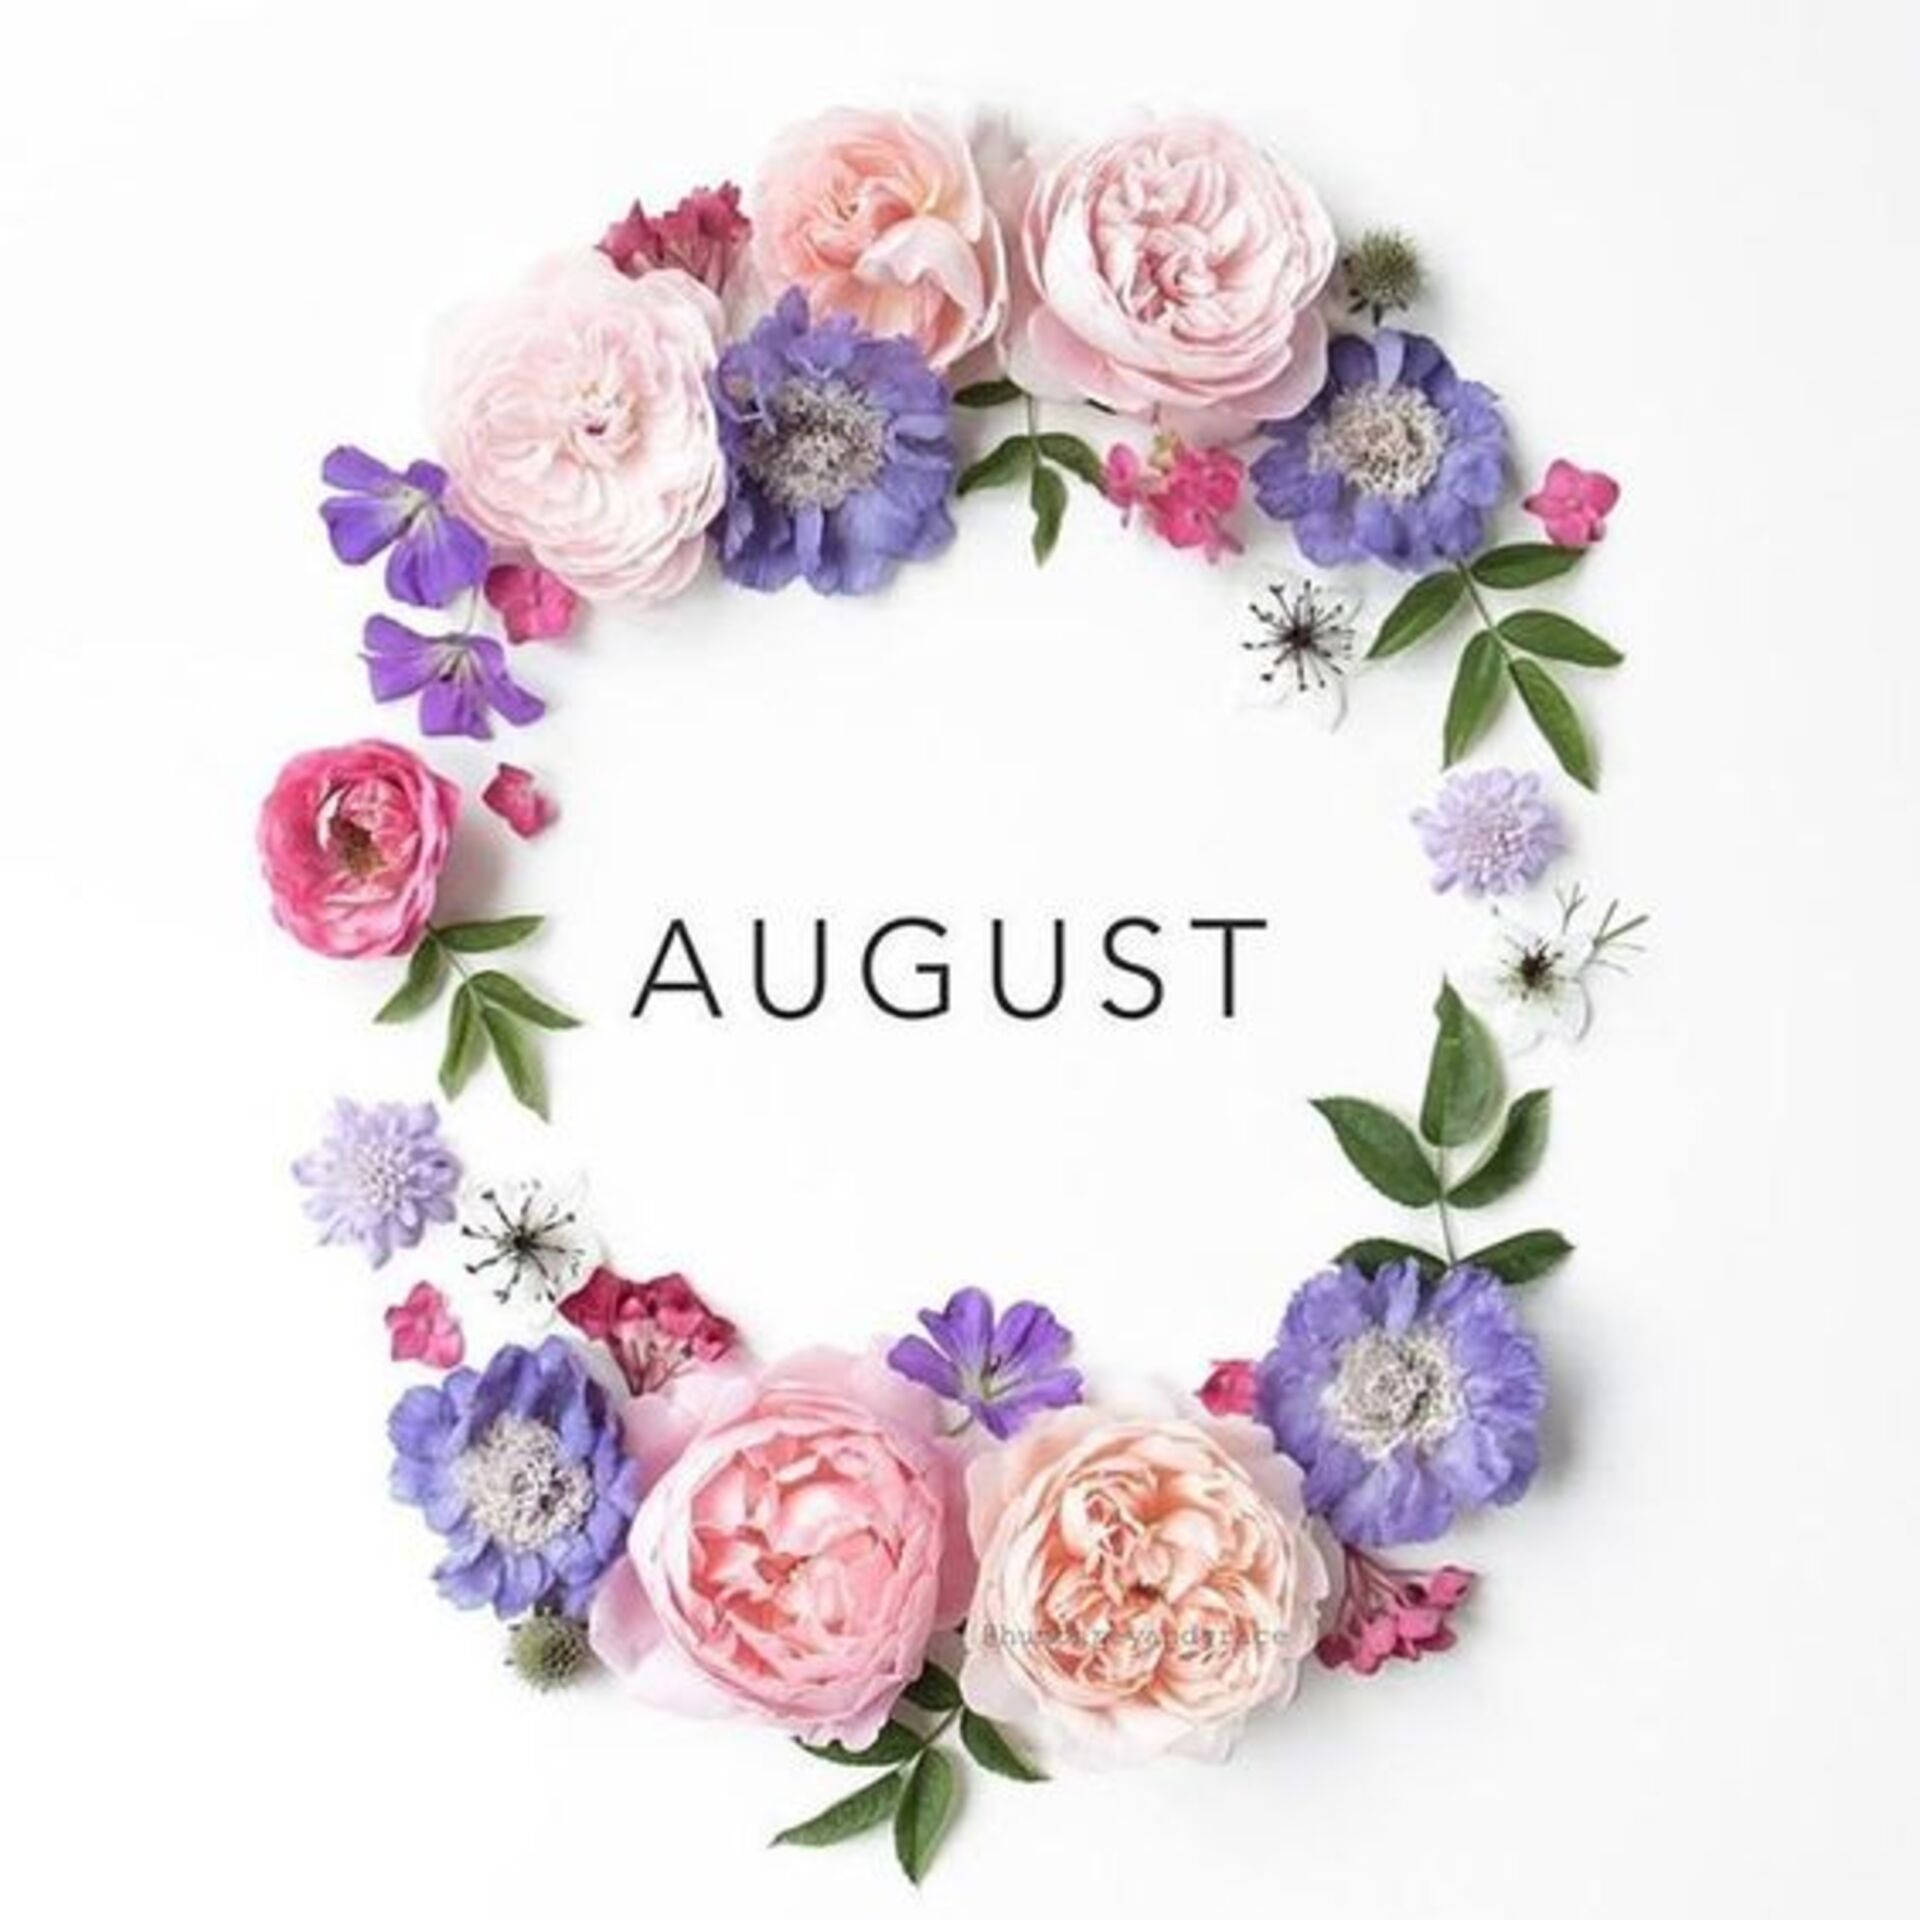 A Beautiful Flower Wreath To Welcome August Background